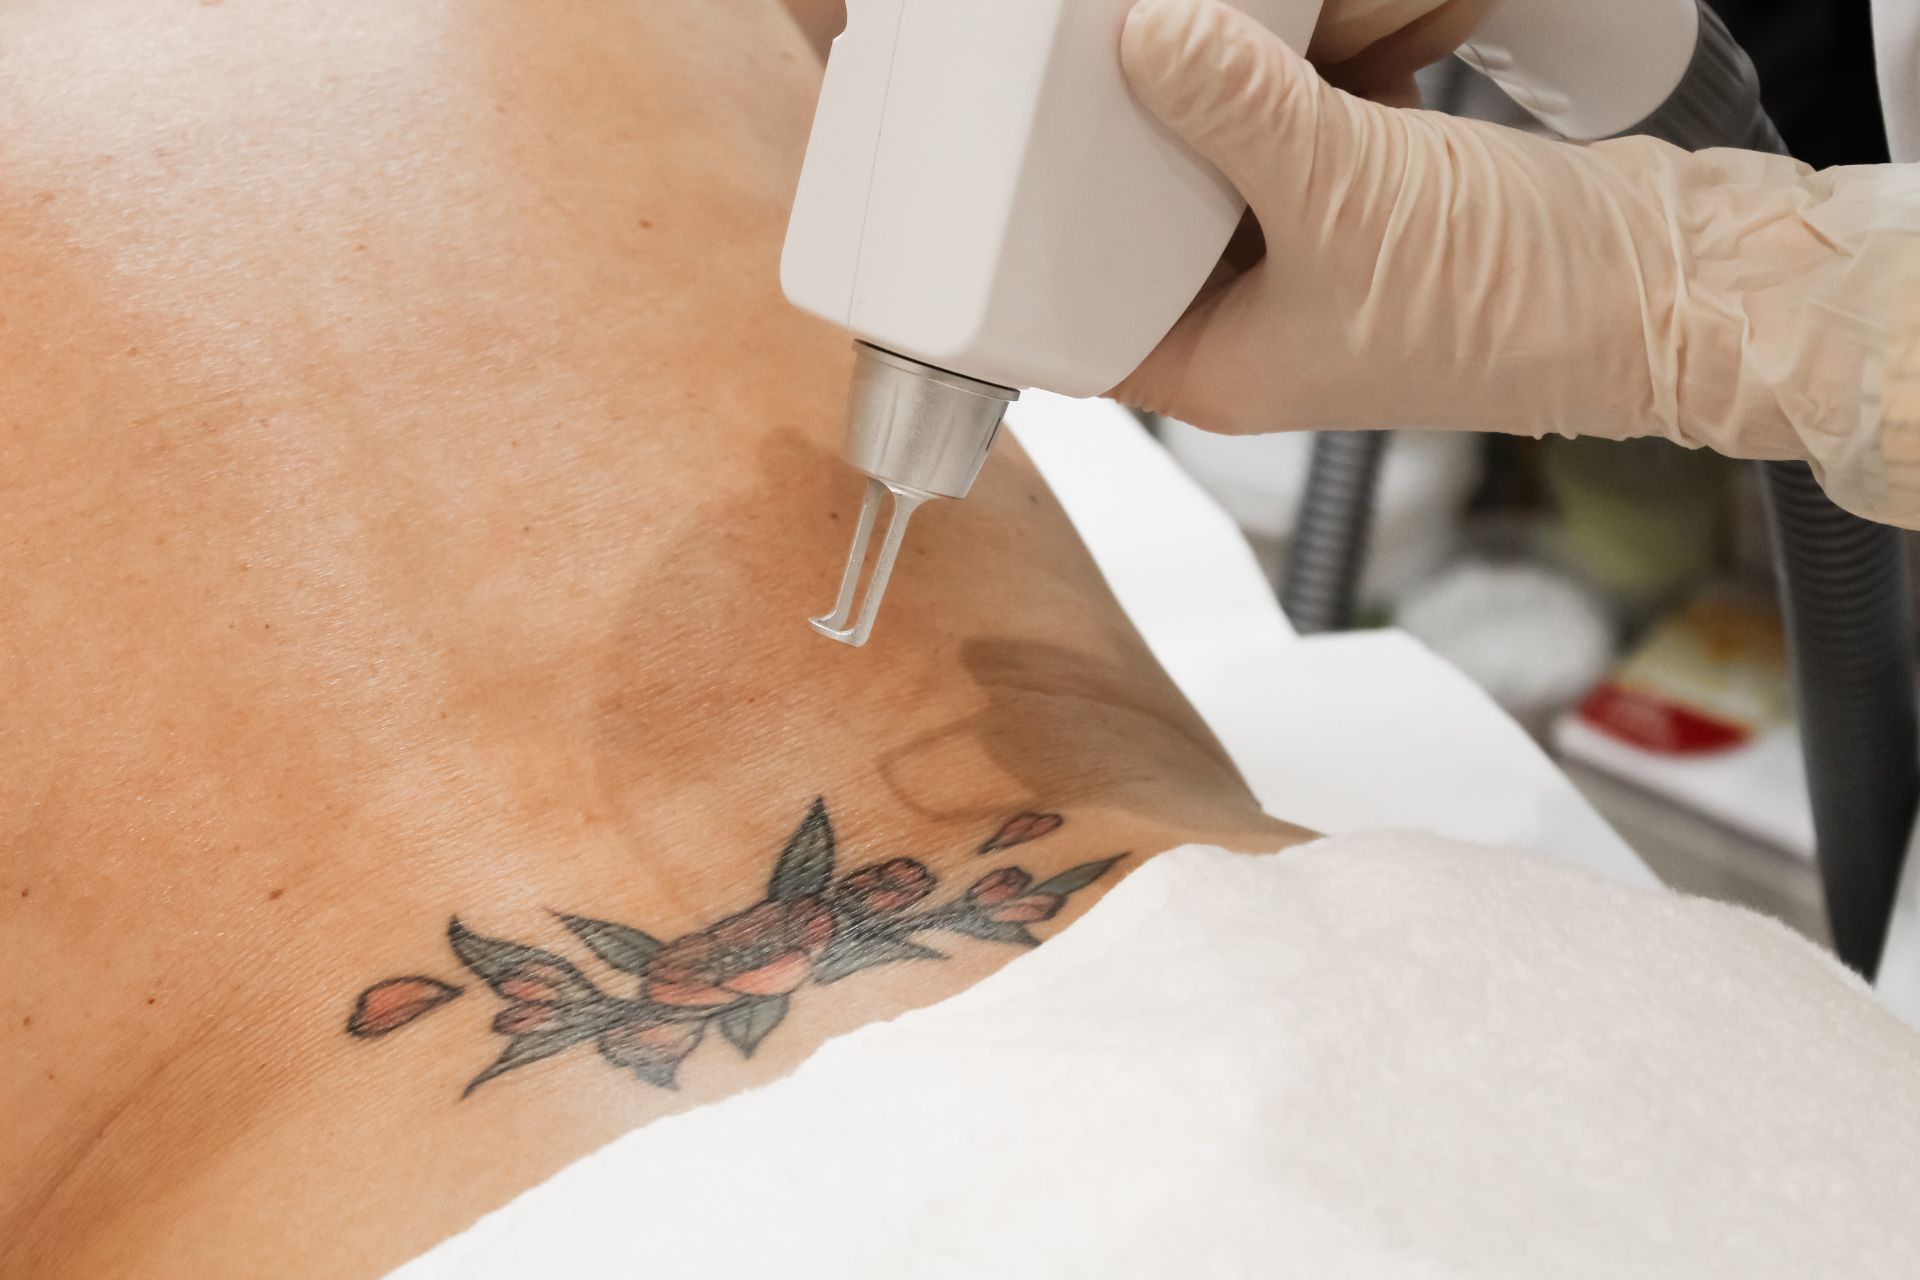 What is laser tattoo removal?